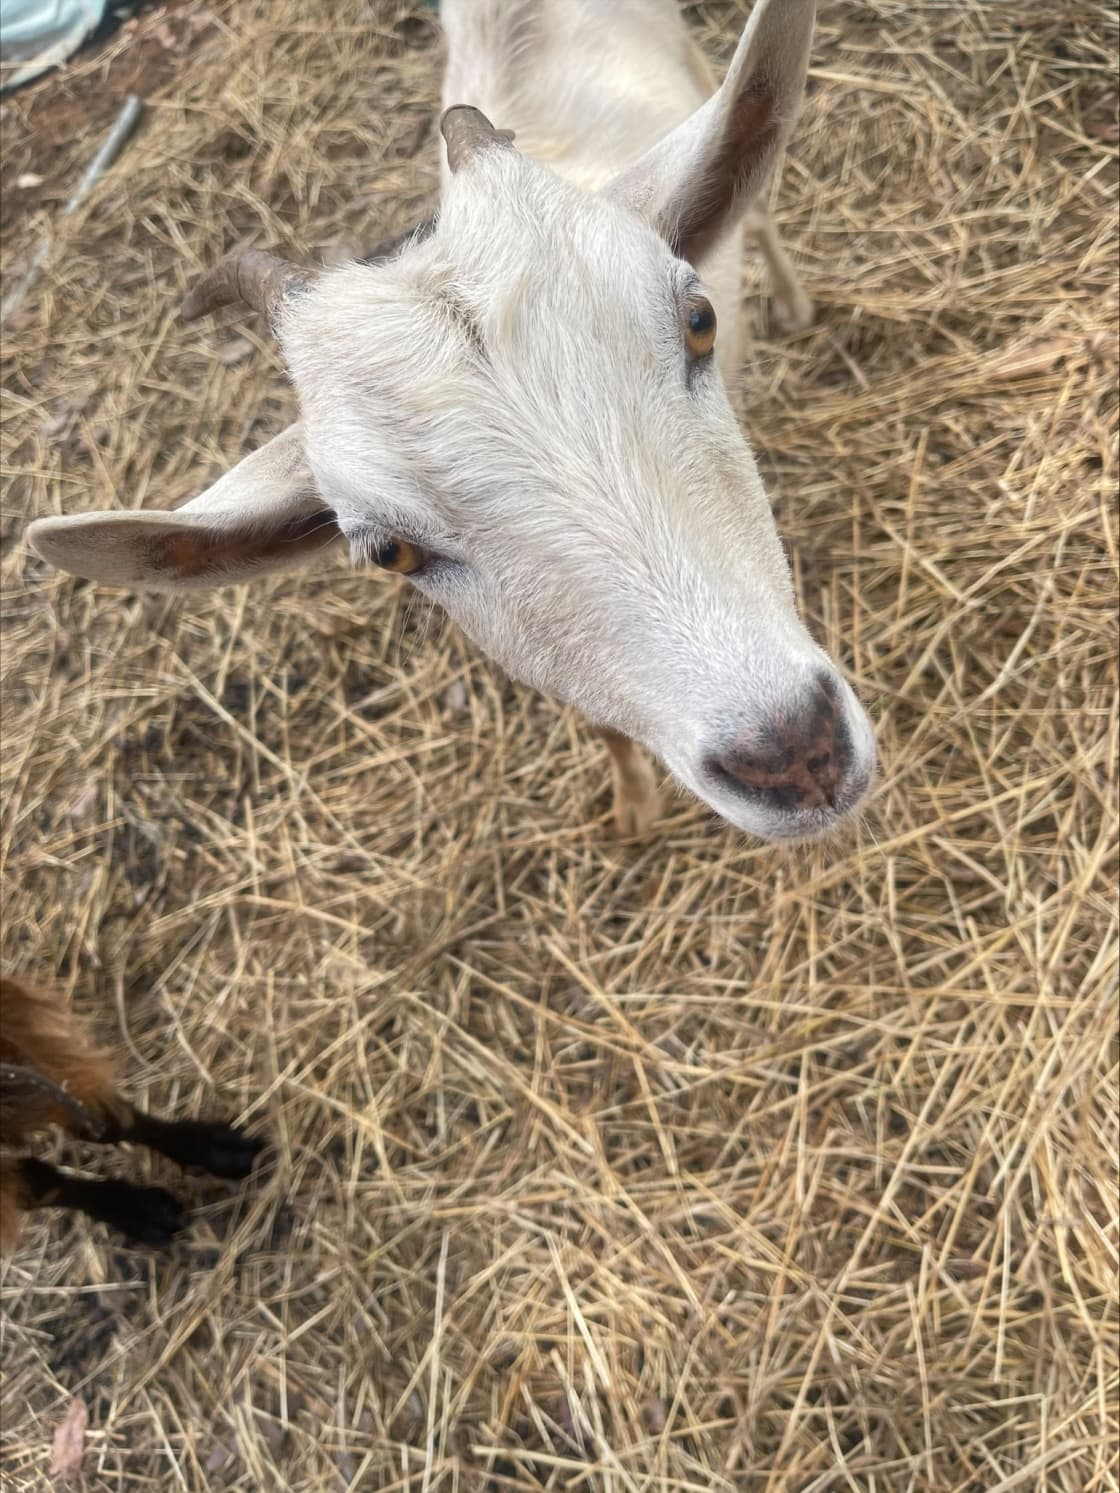 Our Miniature goat

